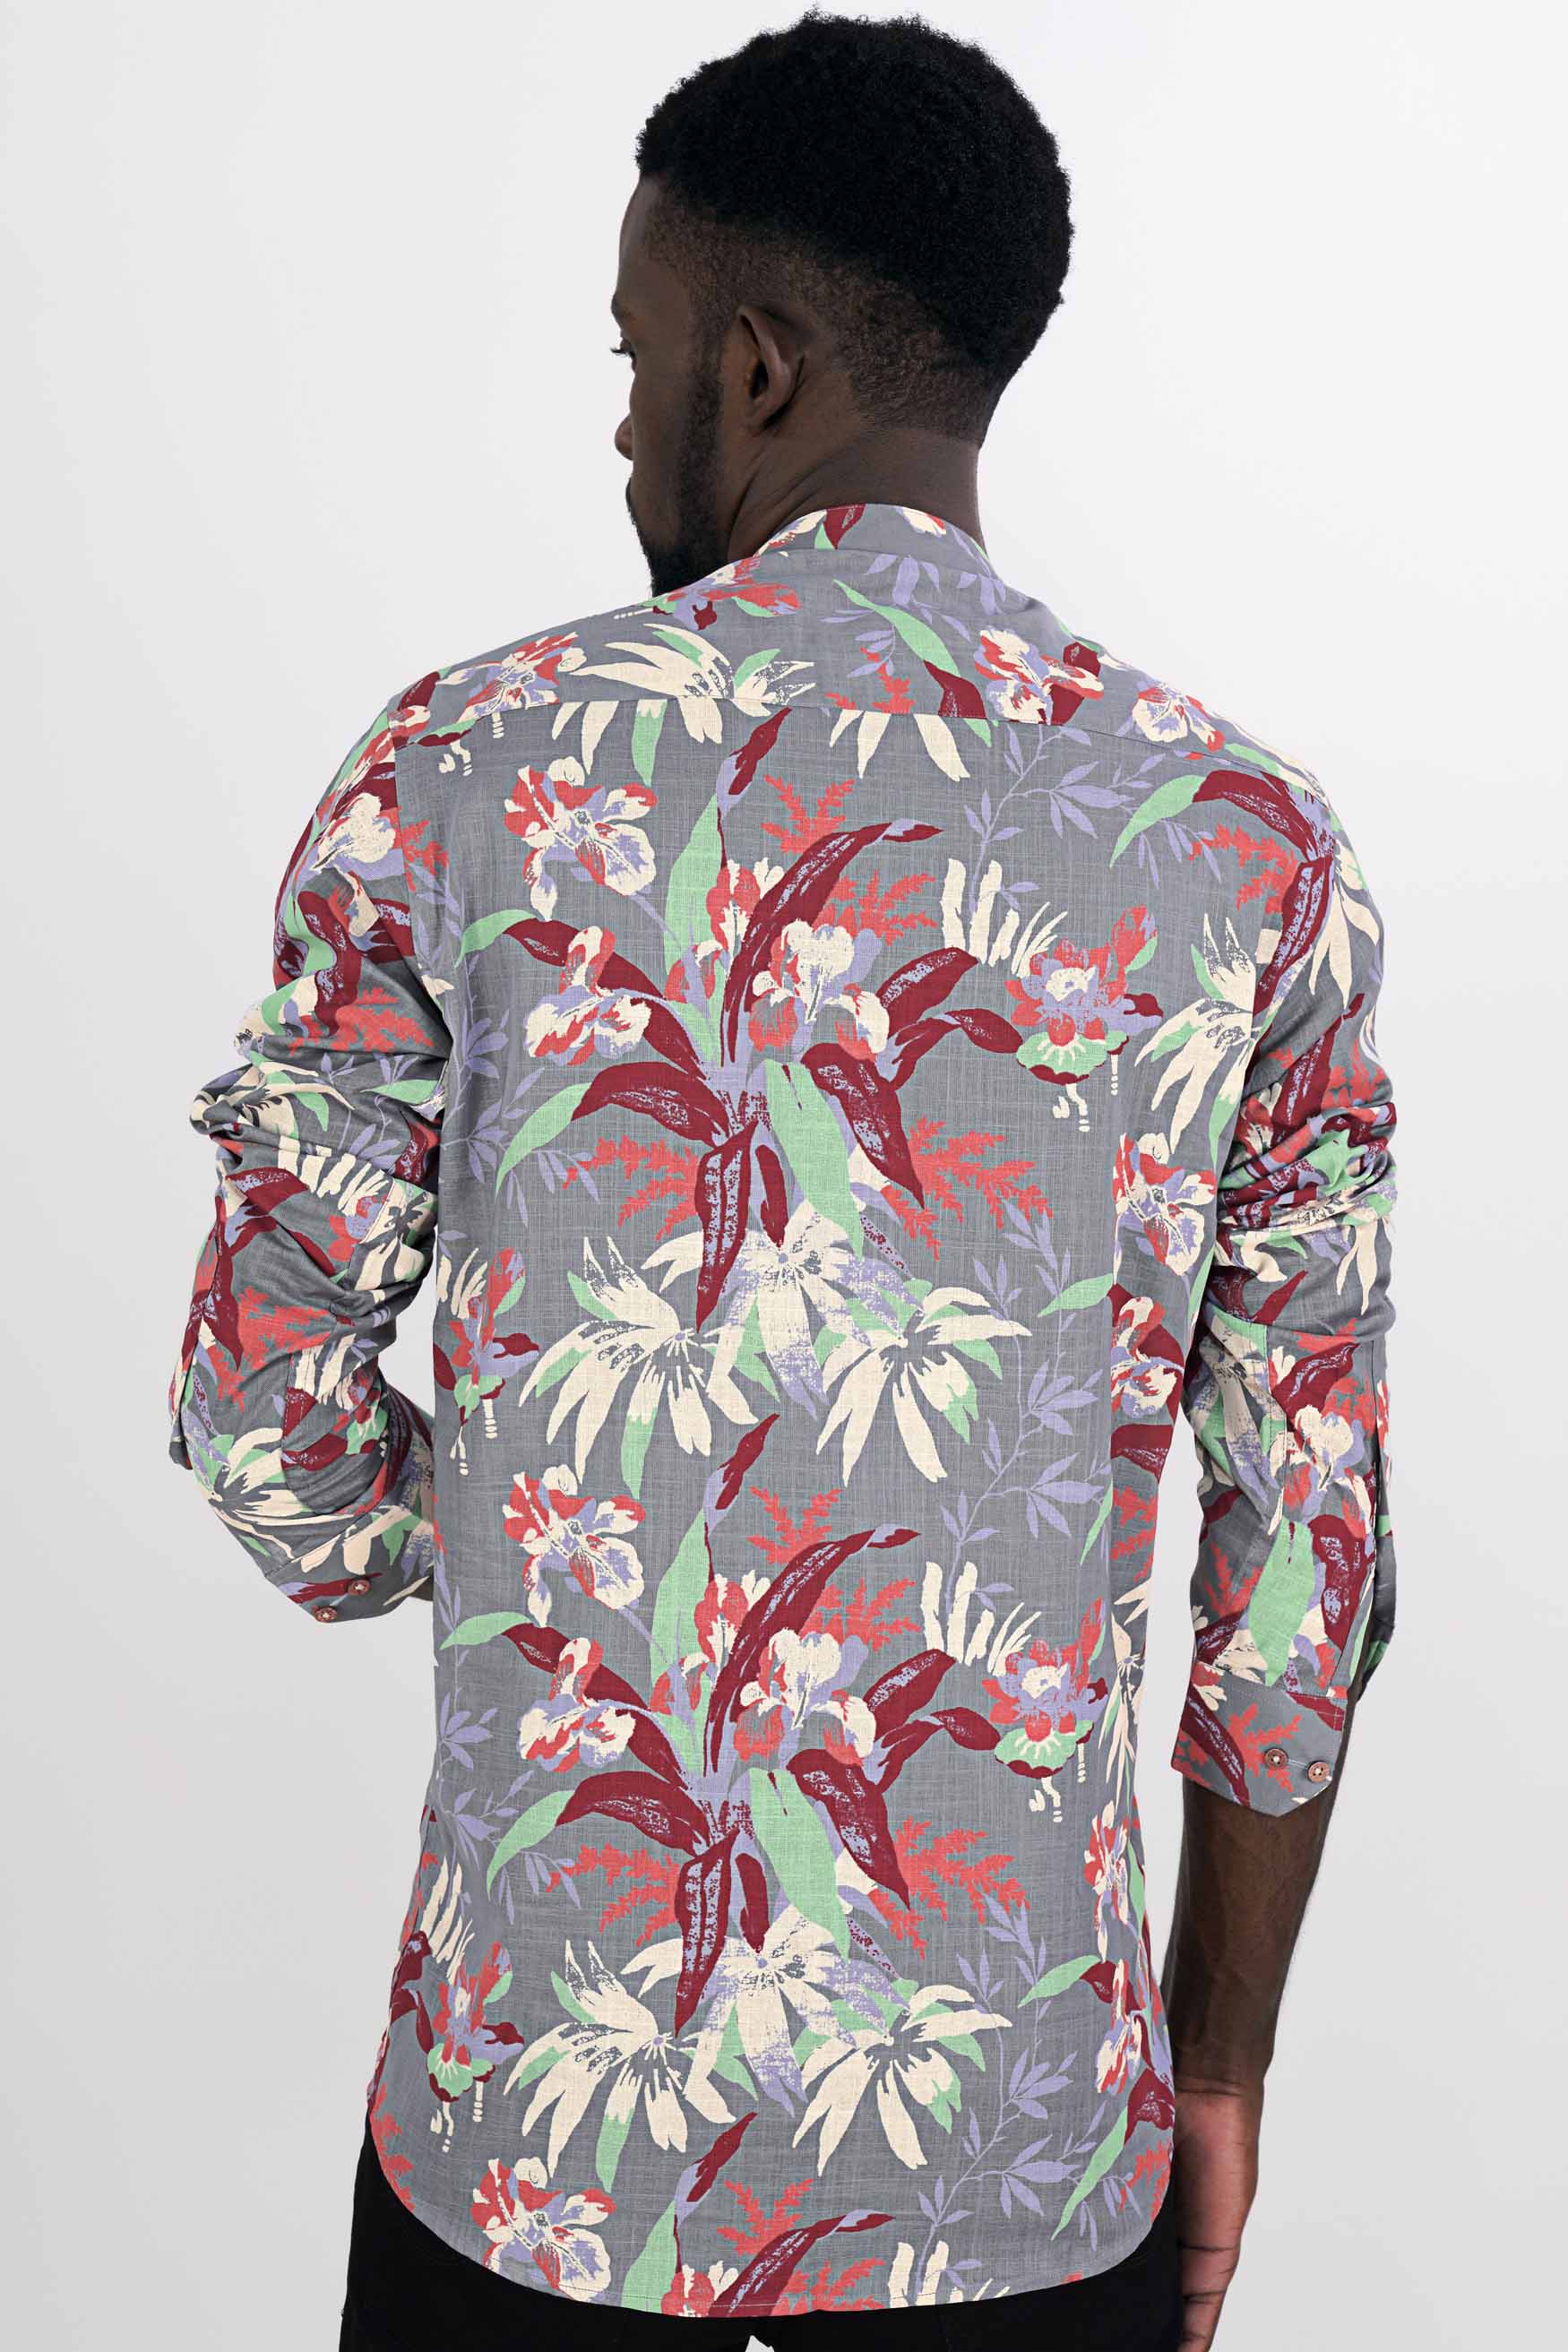 Nevada Gray with Espresso Red and Algae Green Leaves Printed Luxurious Linen Kurta Shirt